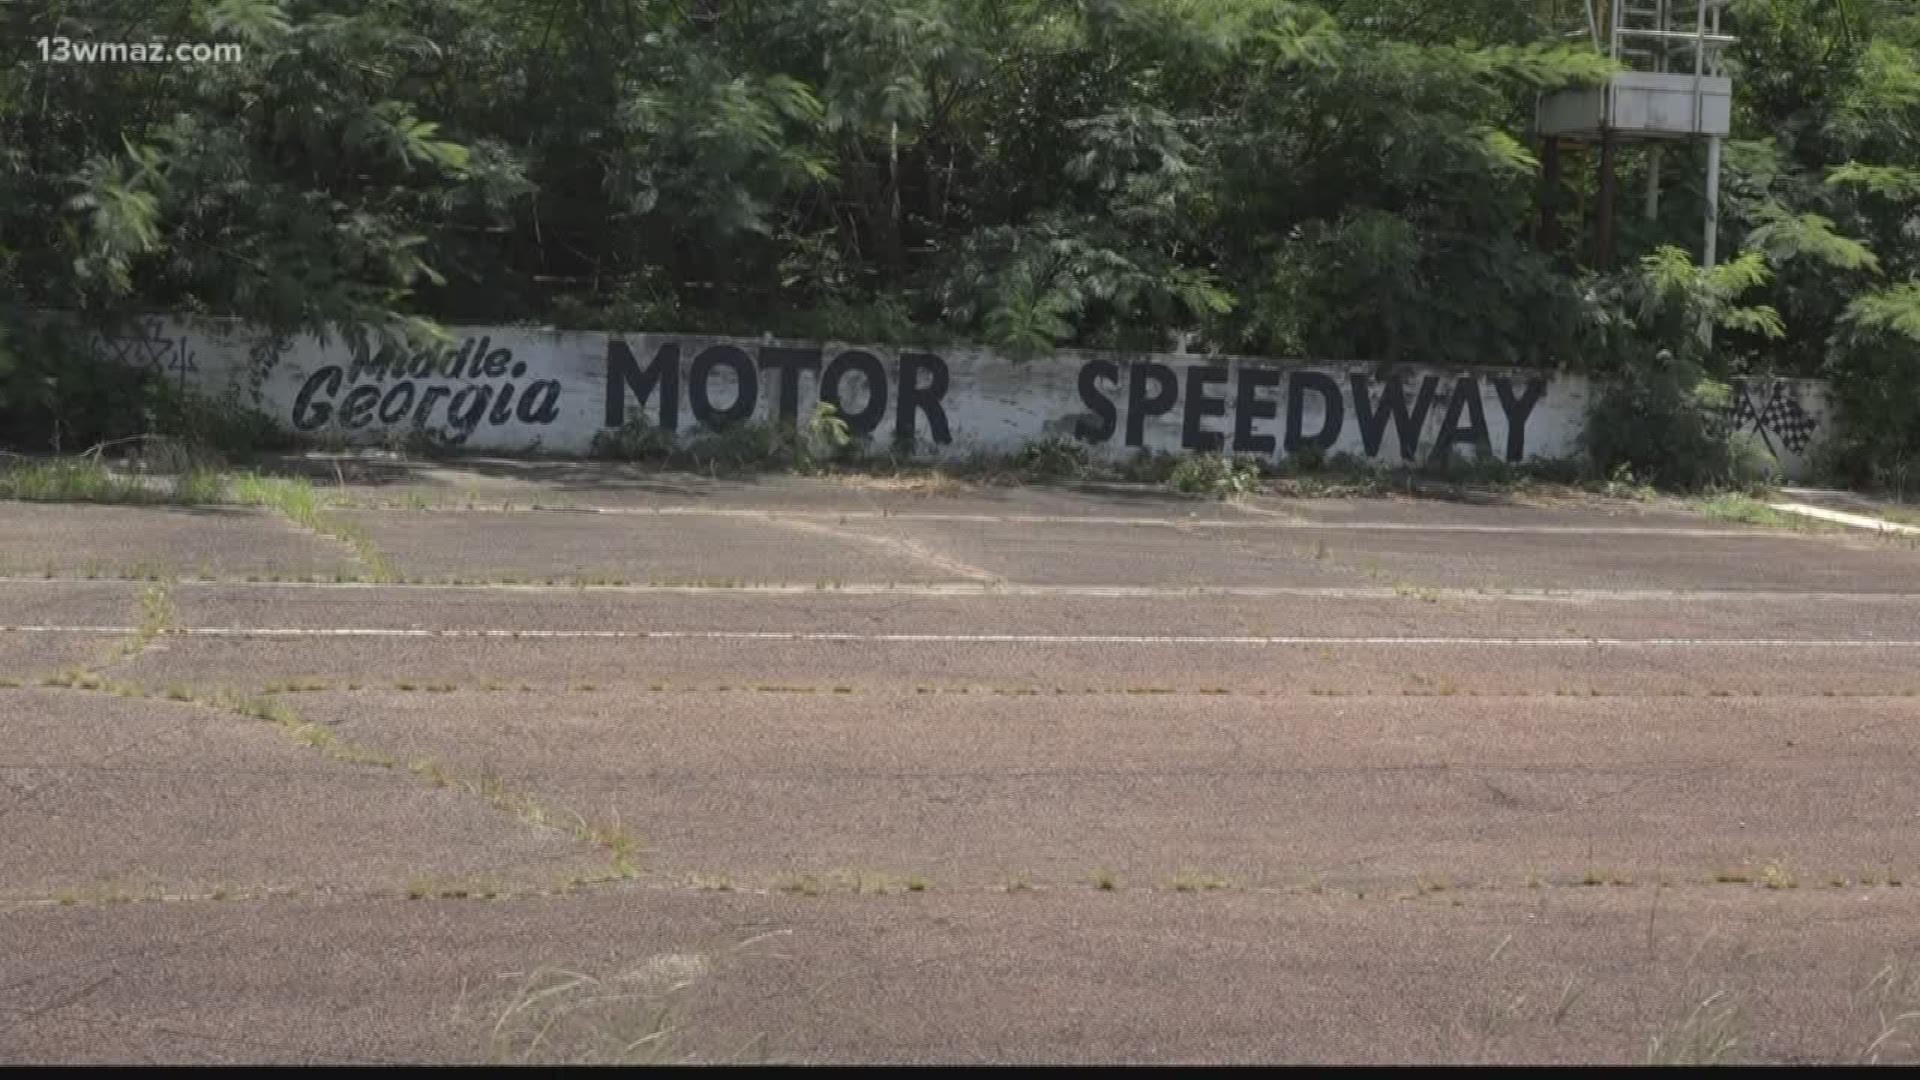 Back in the 1960s, the Middle Georgia Raceway was a popular racetrack for early NASCAR greats, and the 80 acres it sits on hosted one of the biggest music festivals in the 1970s. Kayla Solomon met the owner, who grew up on the track and is waiting for the right buyer.